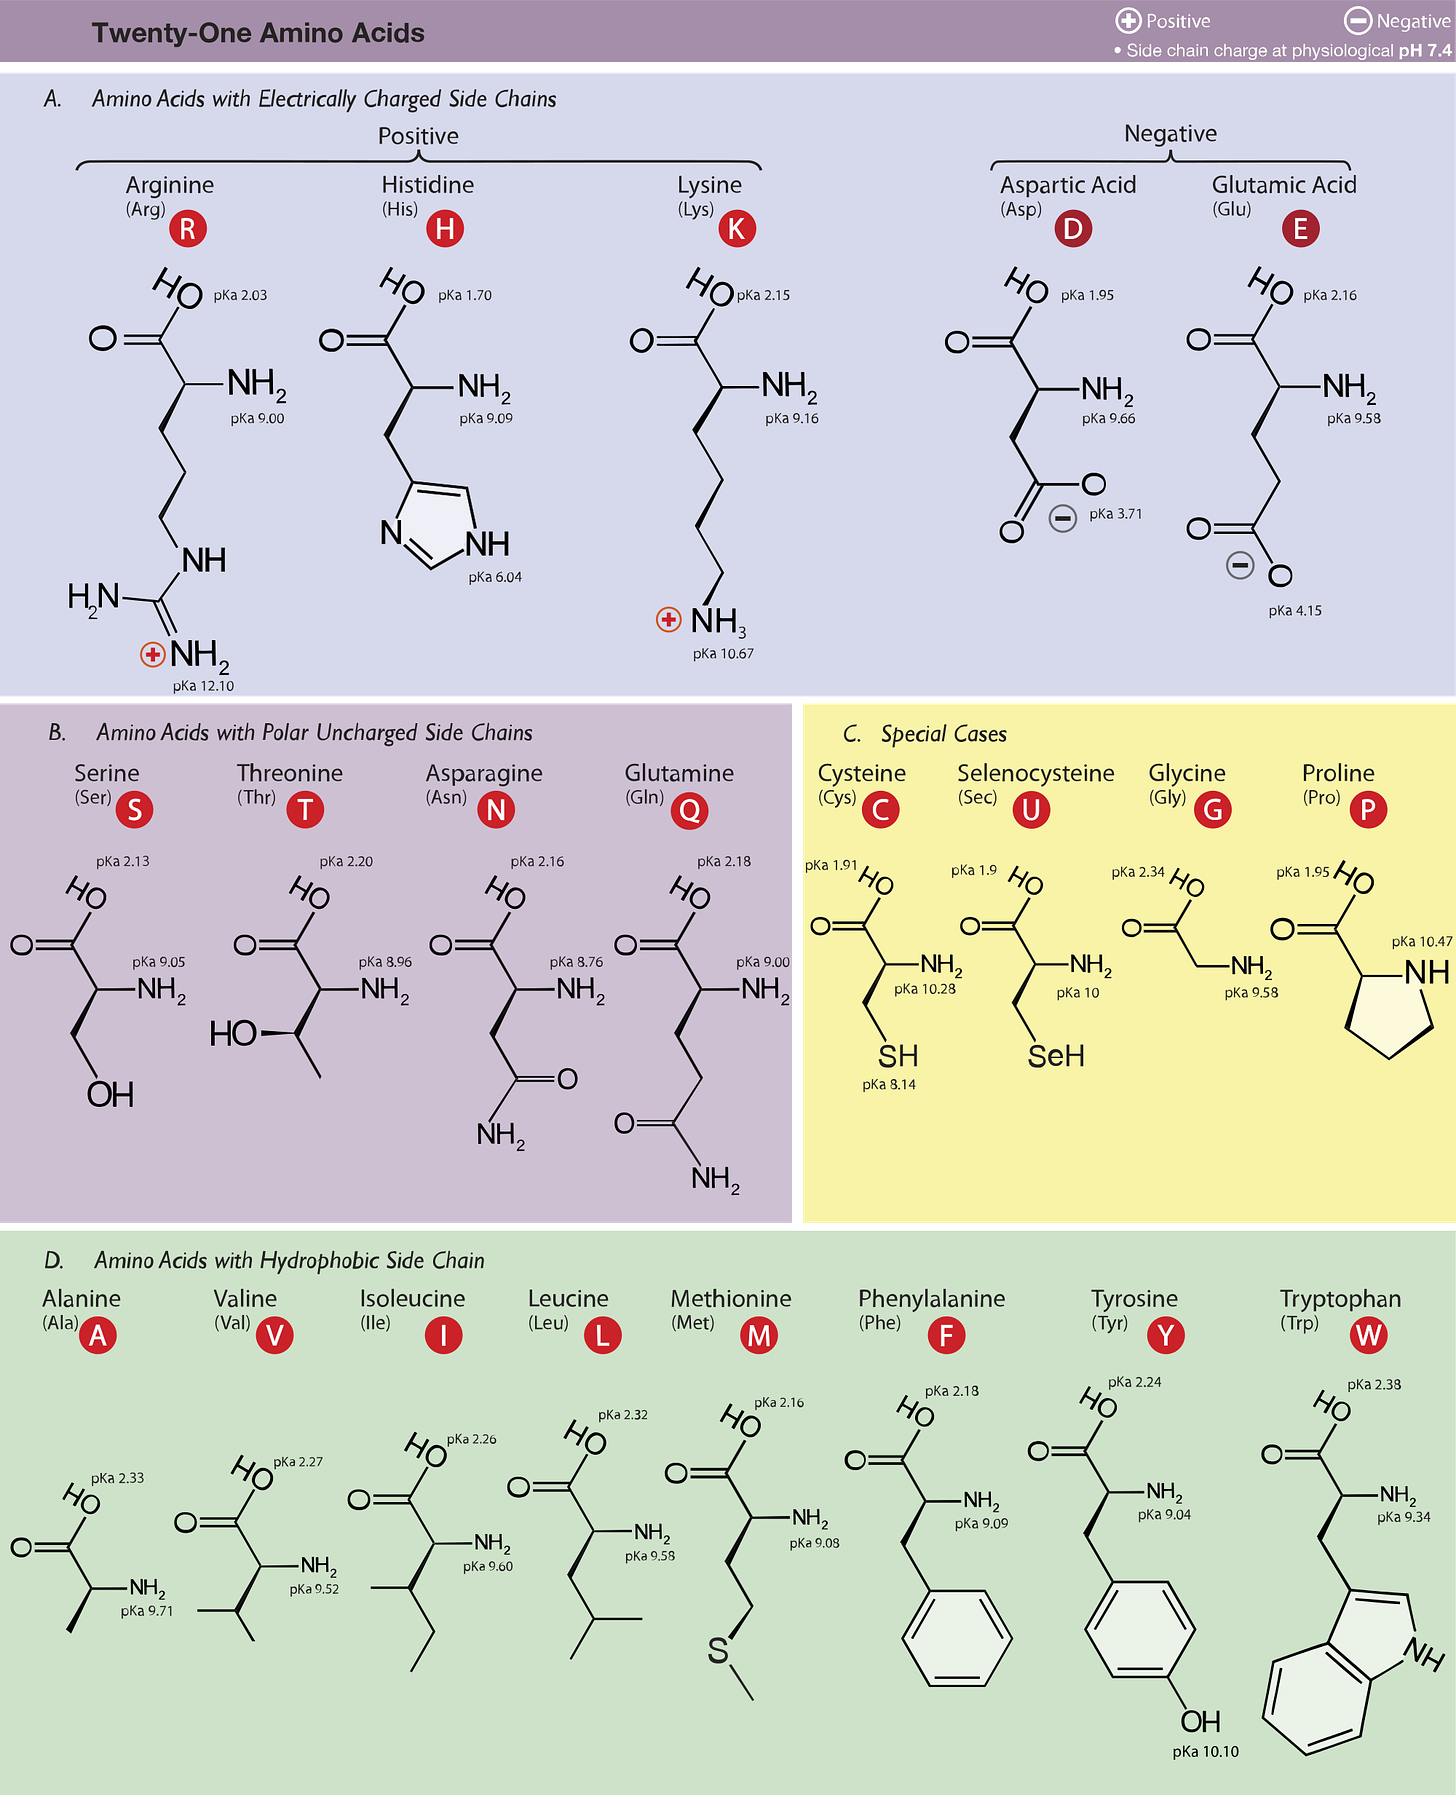 Amino Acid Study Guide: Structure and Function | Albert.io